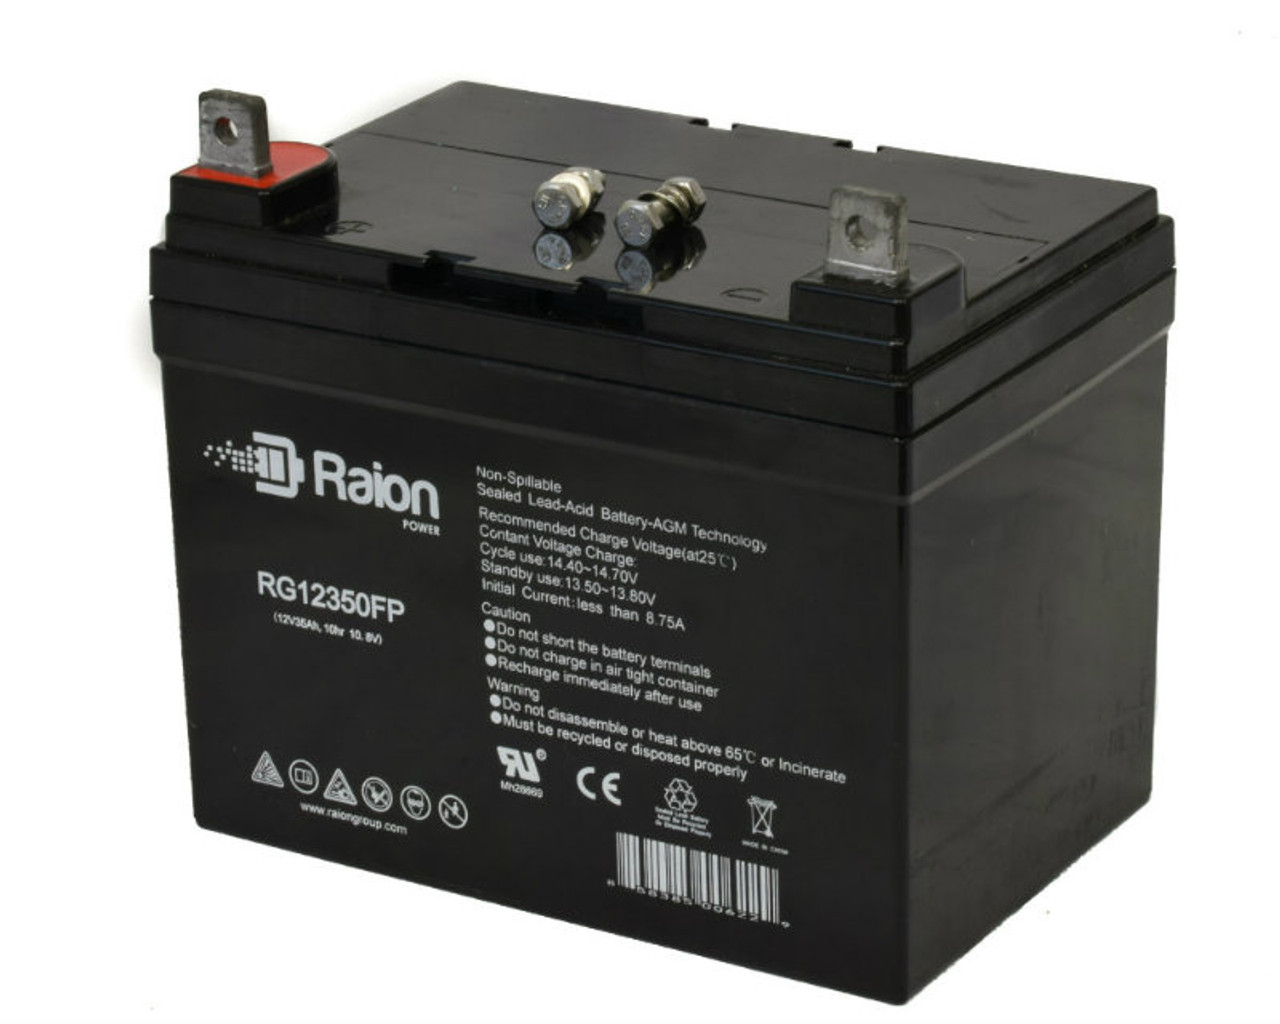 Raion Power Replacement 12V 35Ah RG12350FP Battery for Volta VT1233